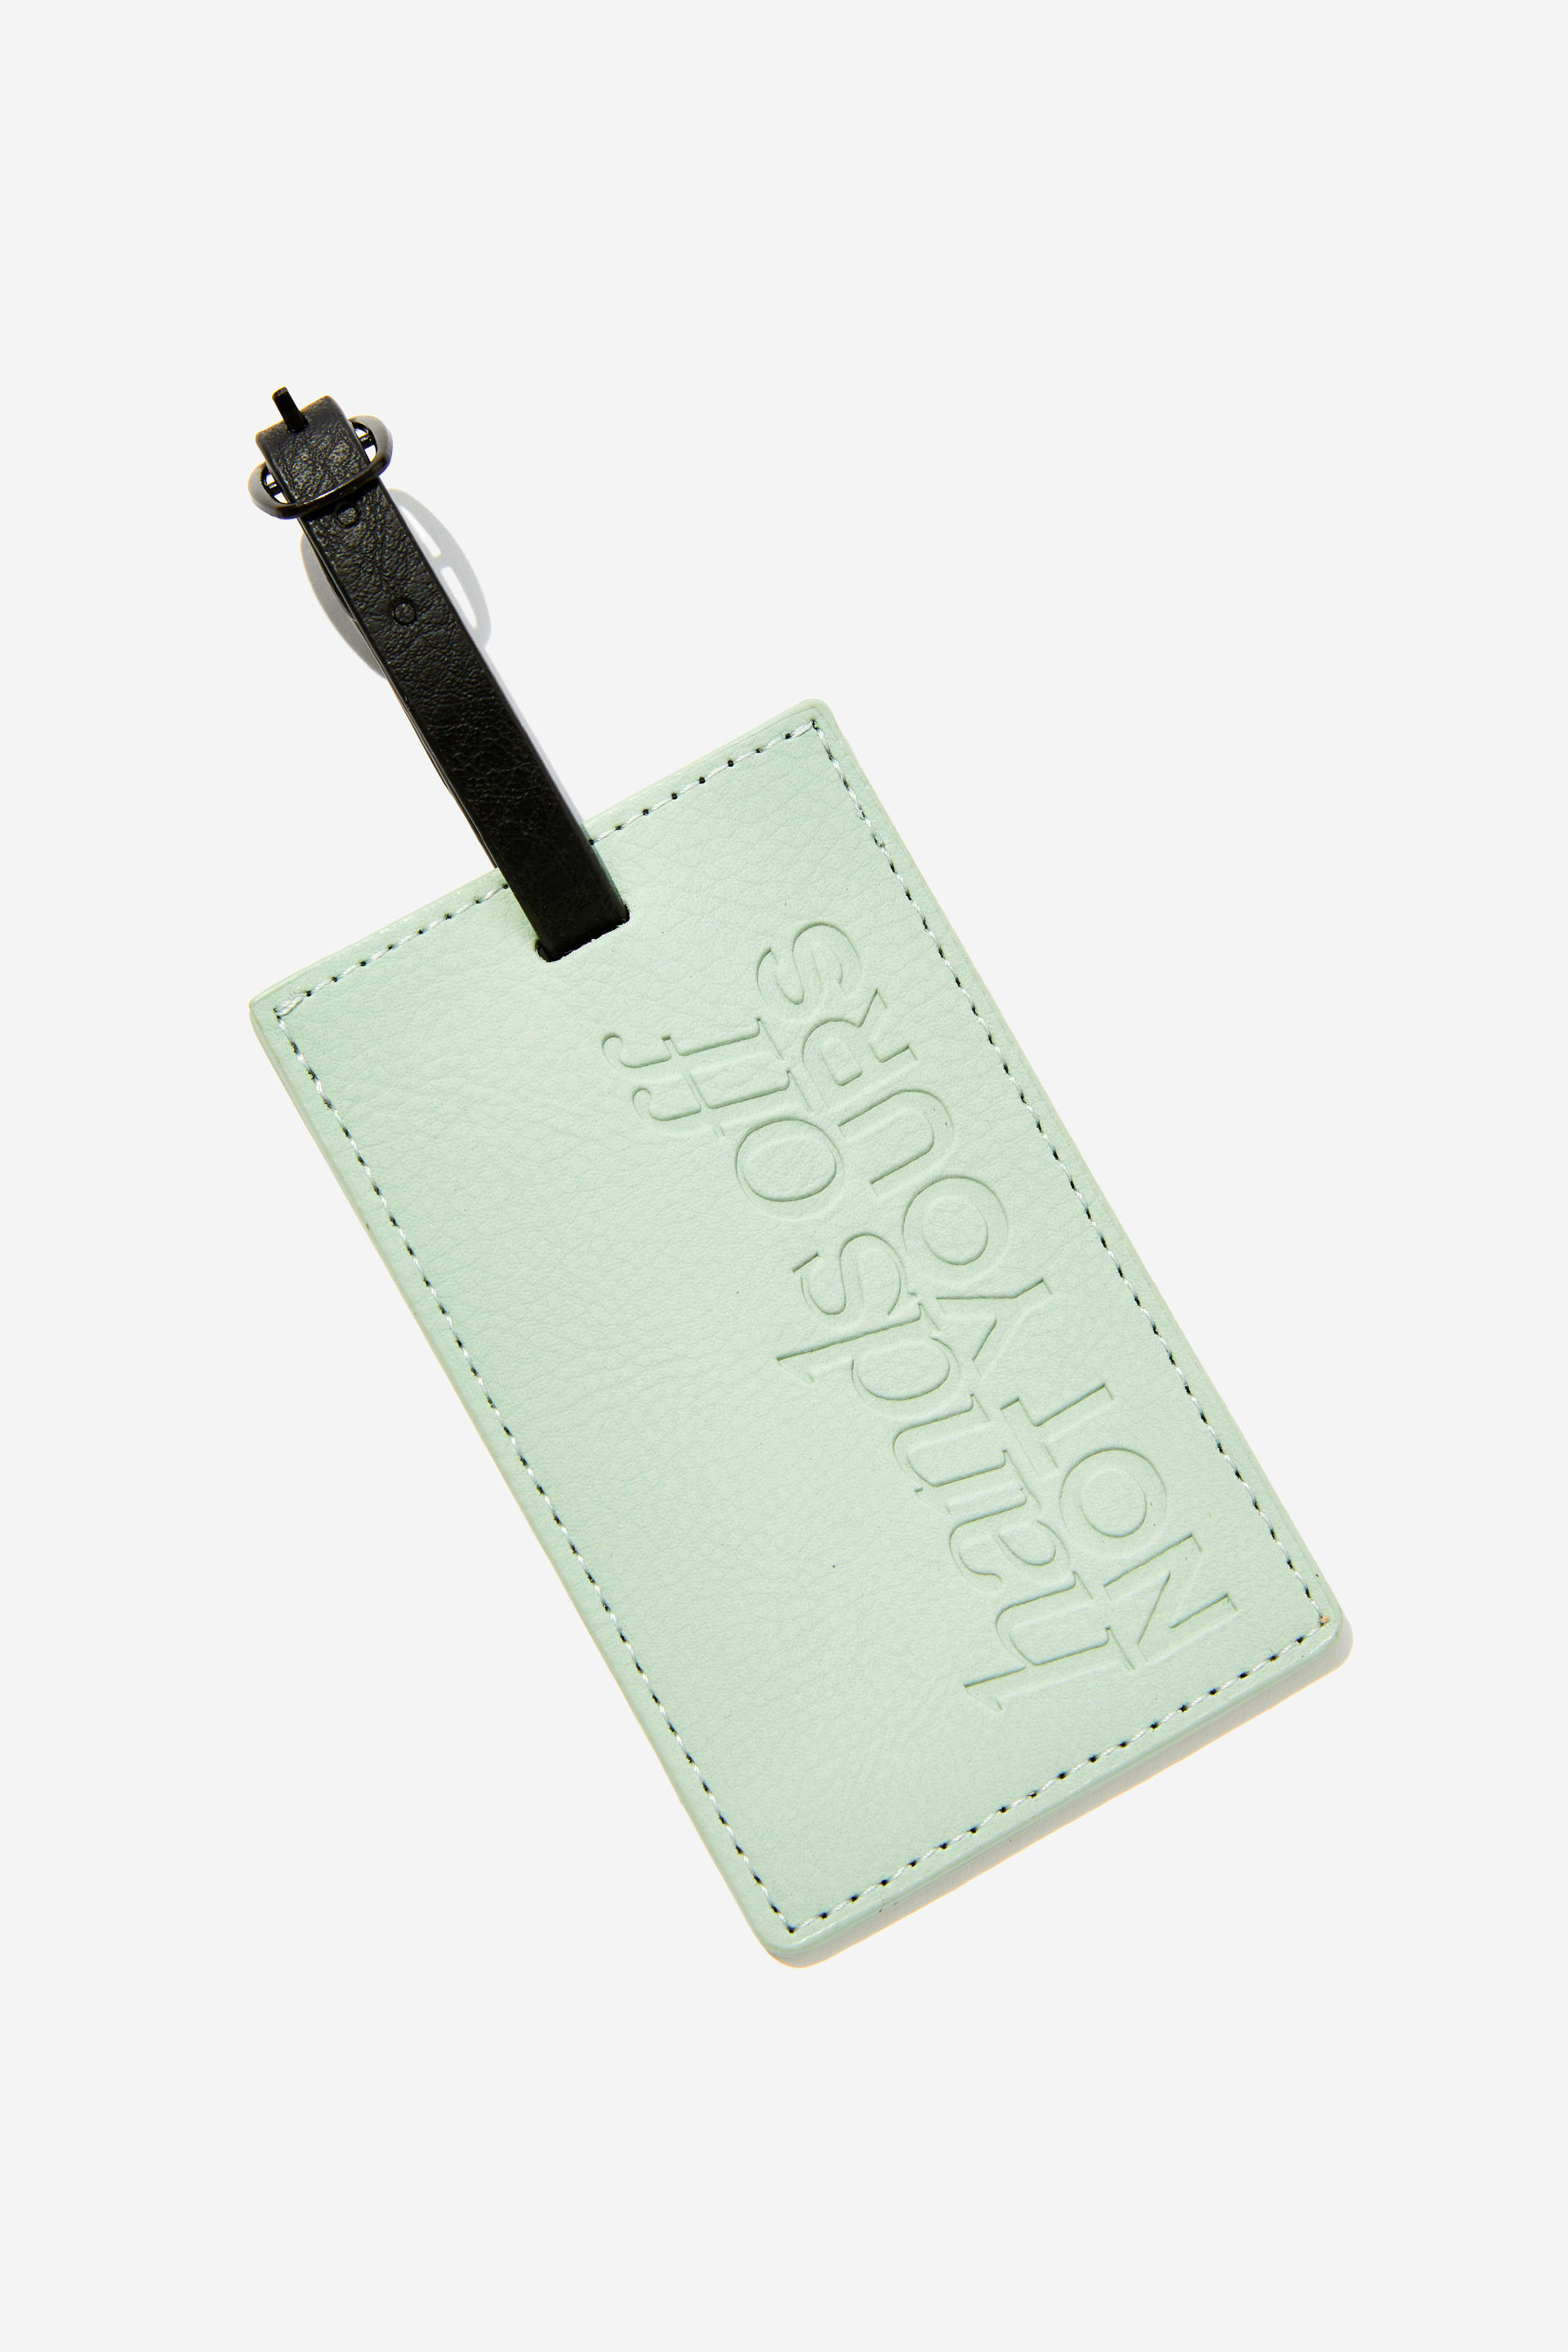 Typo - Off The Grid Luggage Tag - Hands off/ smoke green